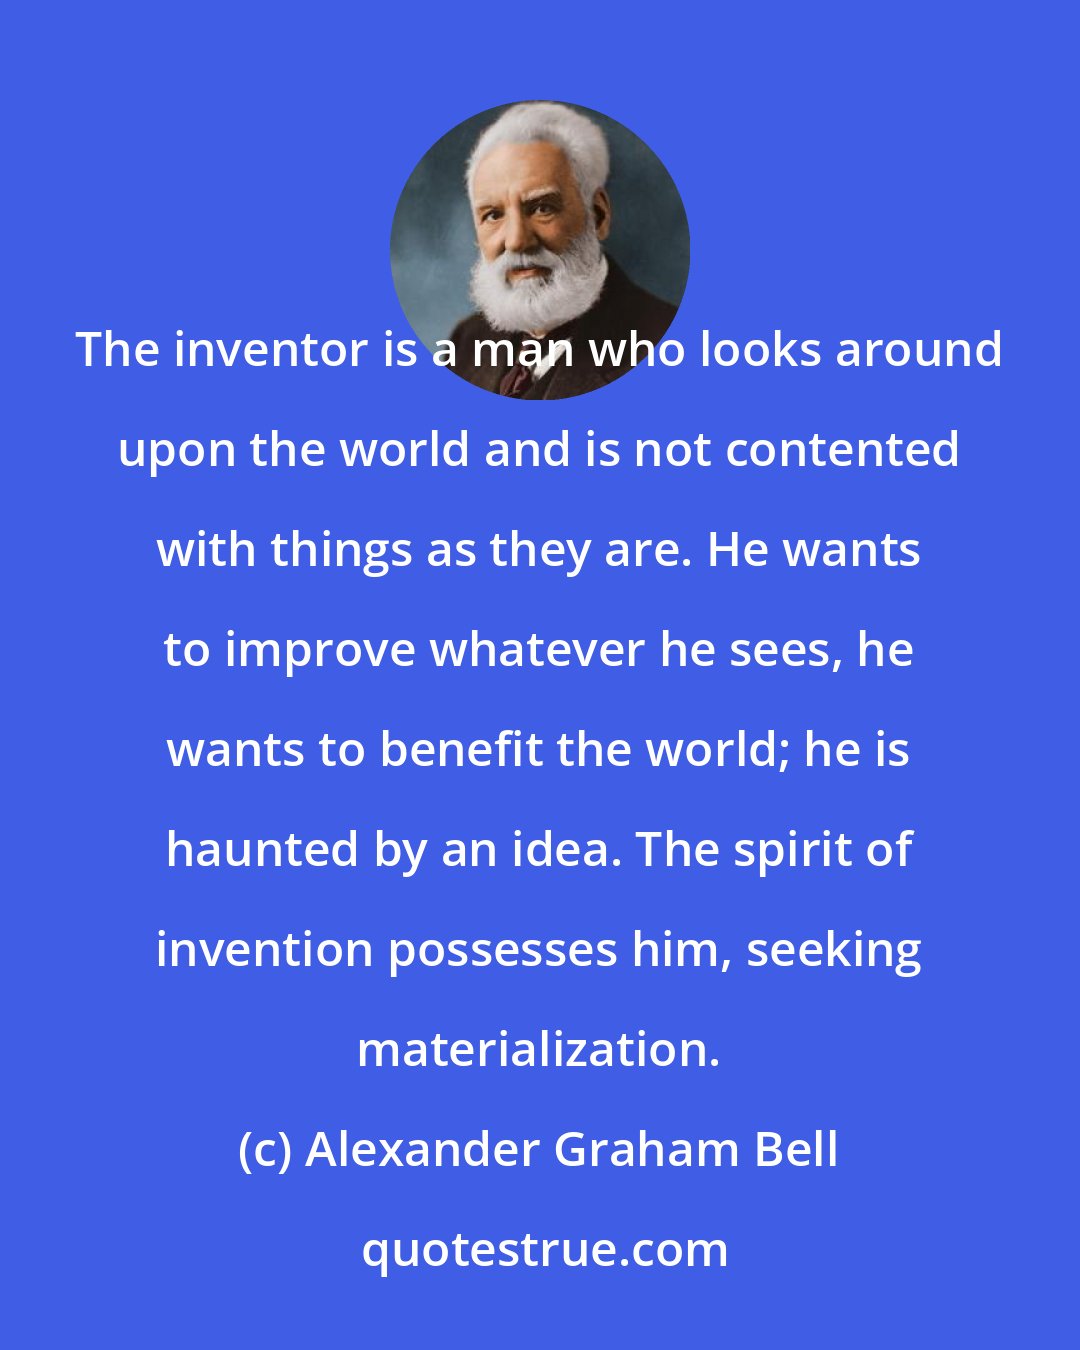 Alexander Graham Bell: The inventor is a man who looks around upon the world and is not contented with things as they are. He wants to improve whatever he sees, he wants to benefit the world; he is haunted by an idea. The spirit of invention possesses him, seeking materialization.